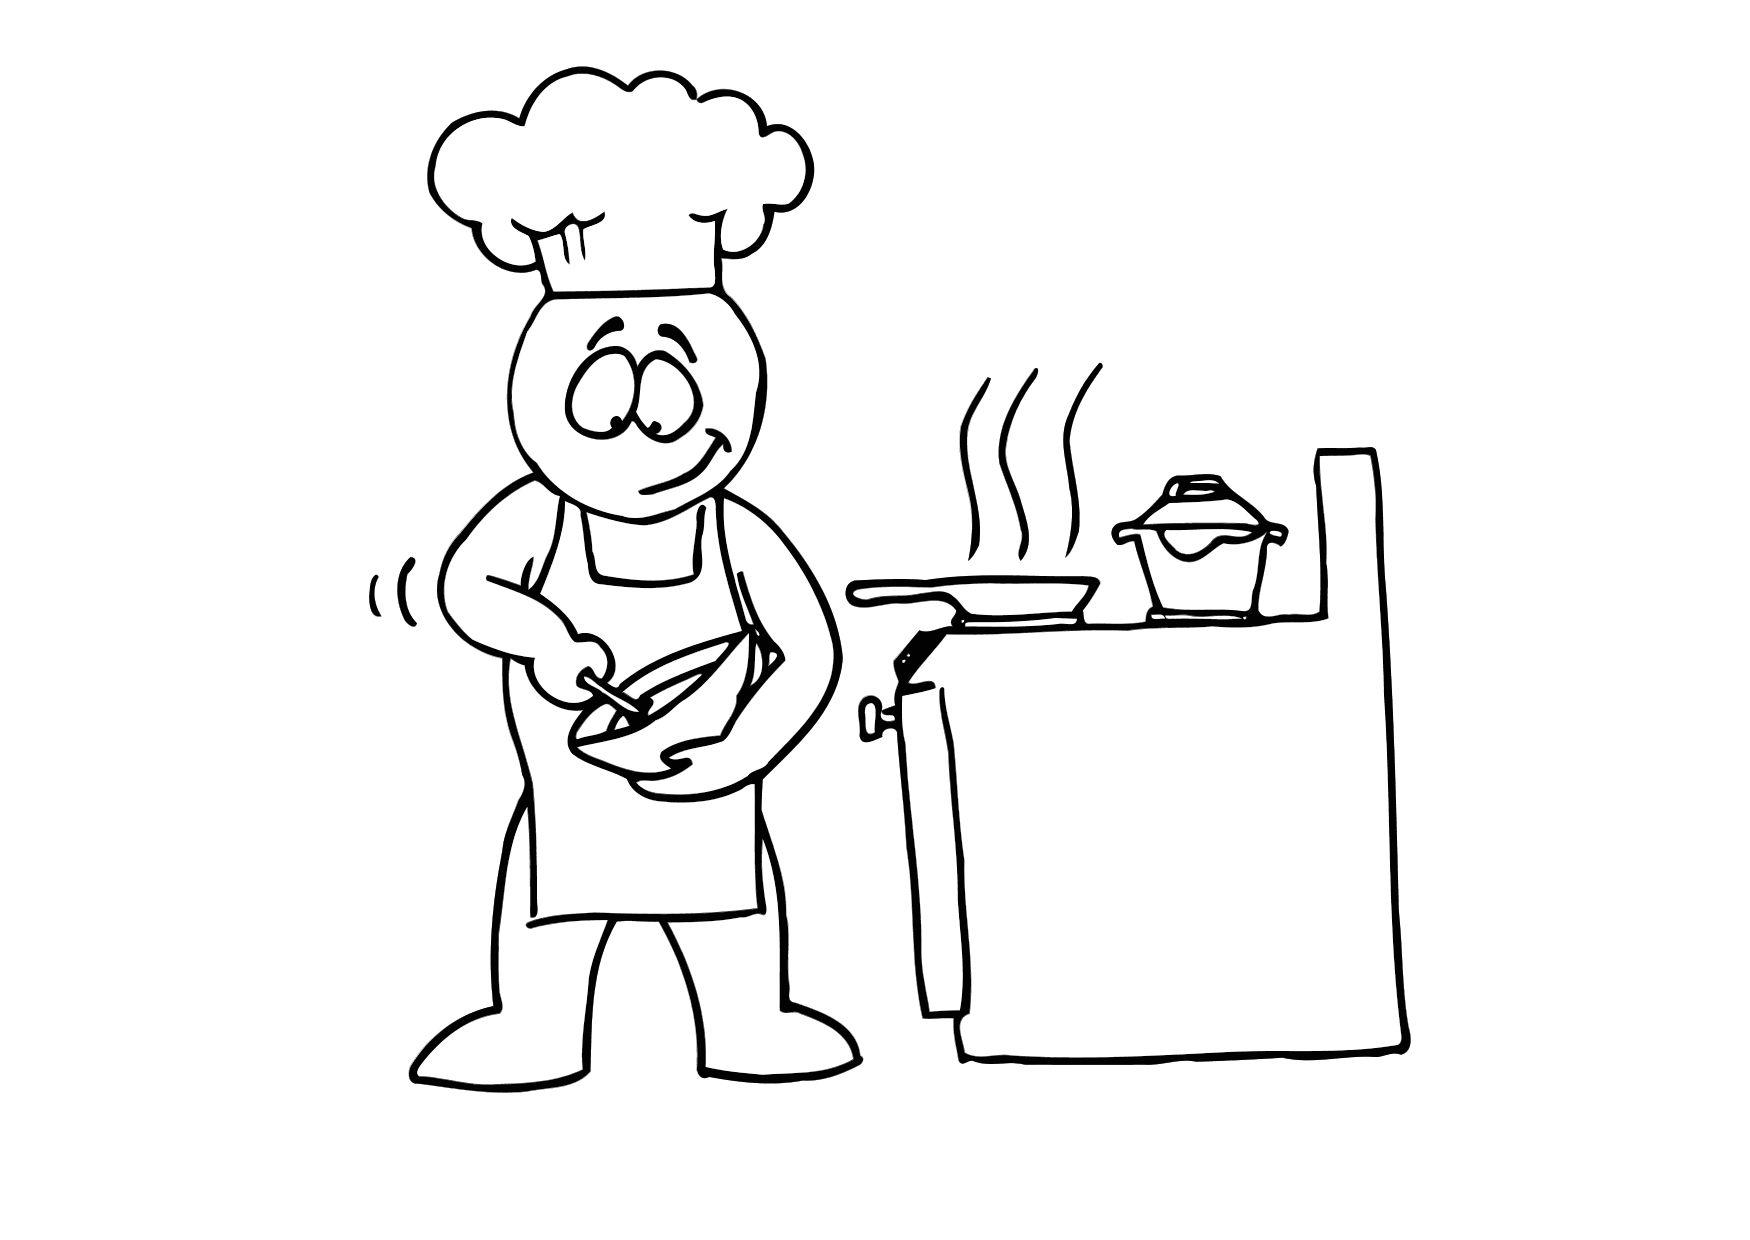 Coloring page cooking - img 11697.